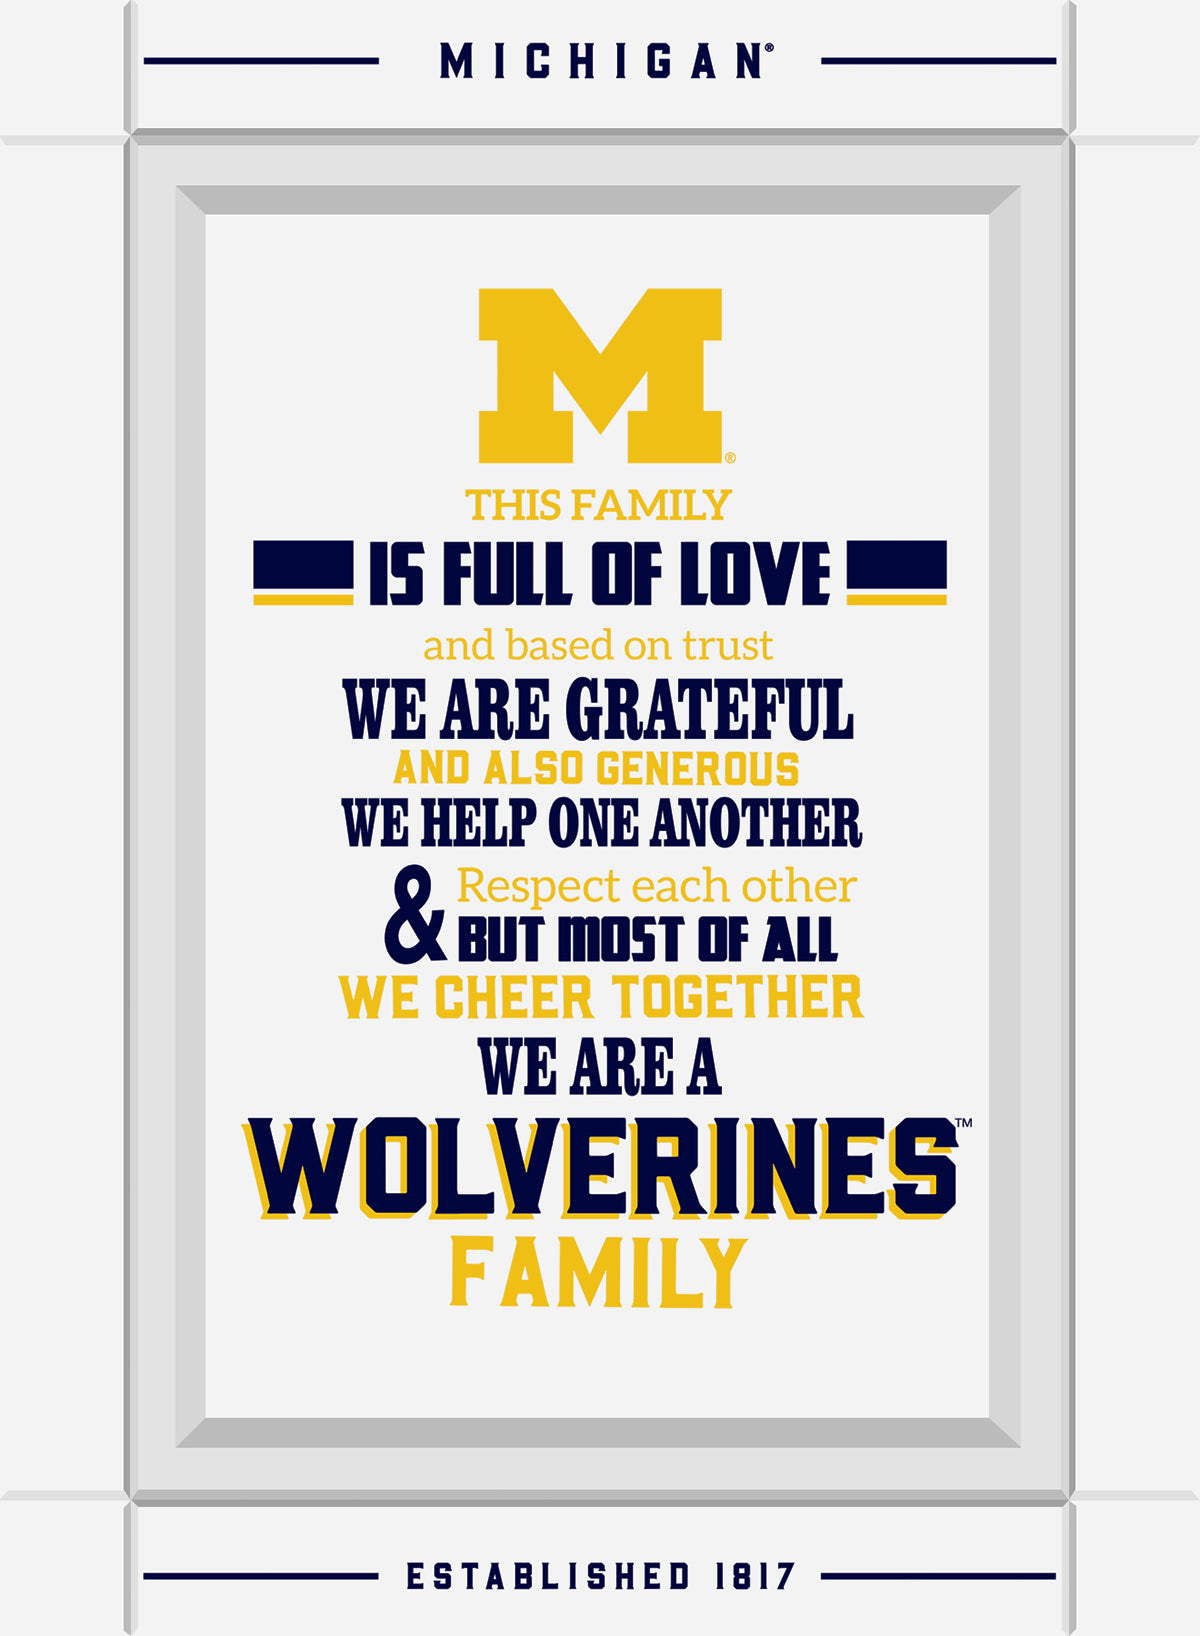 Michigan Wolverines This Family Wall Sign